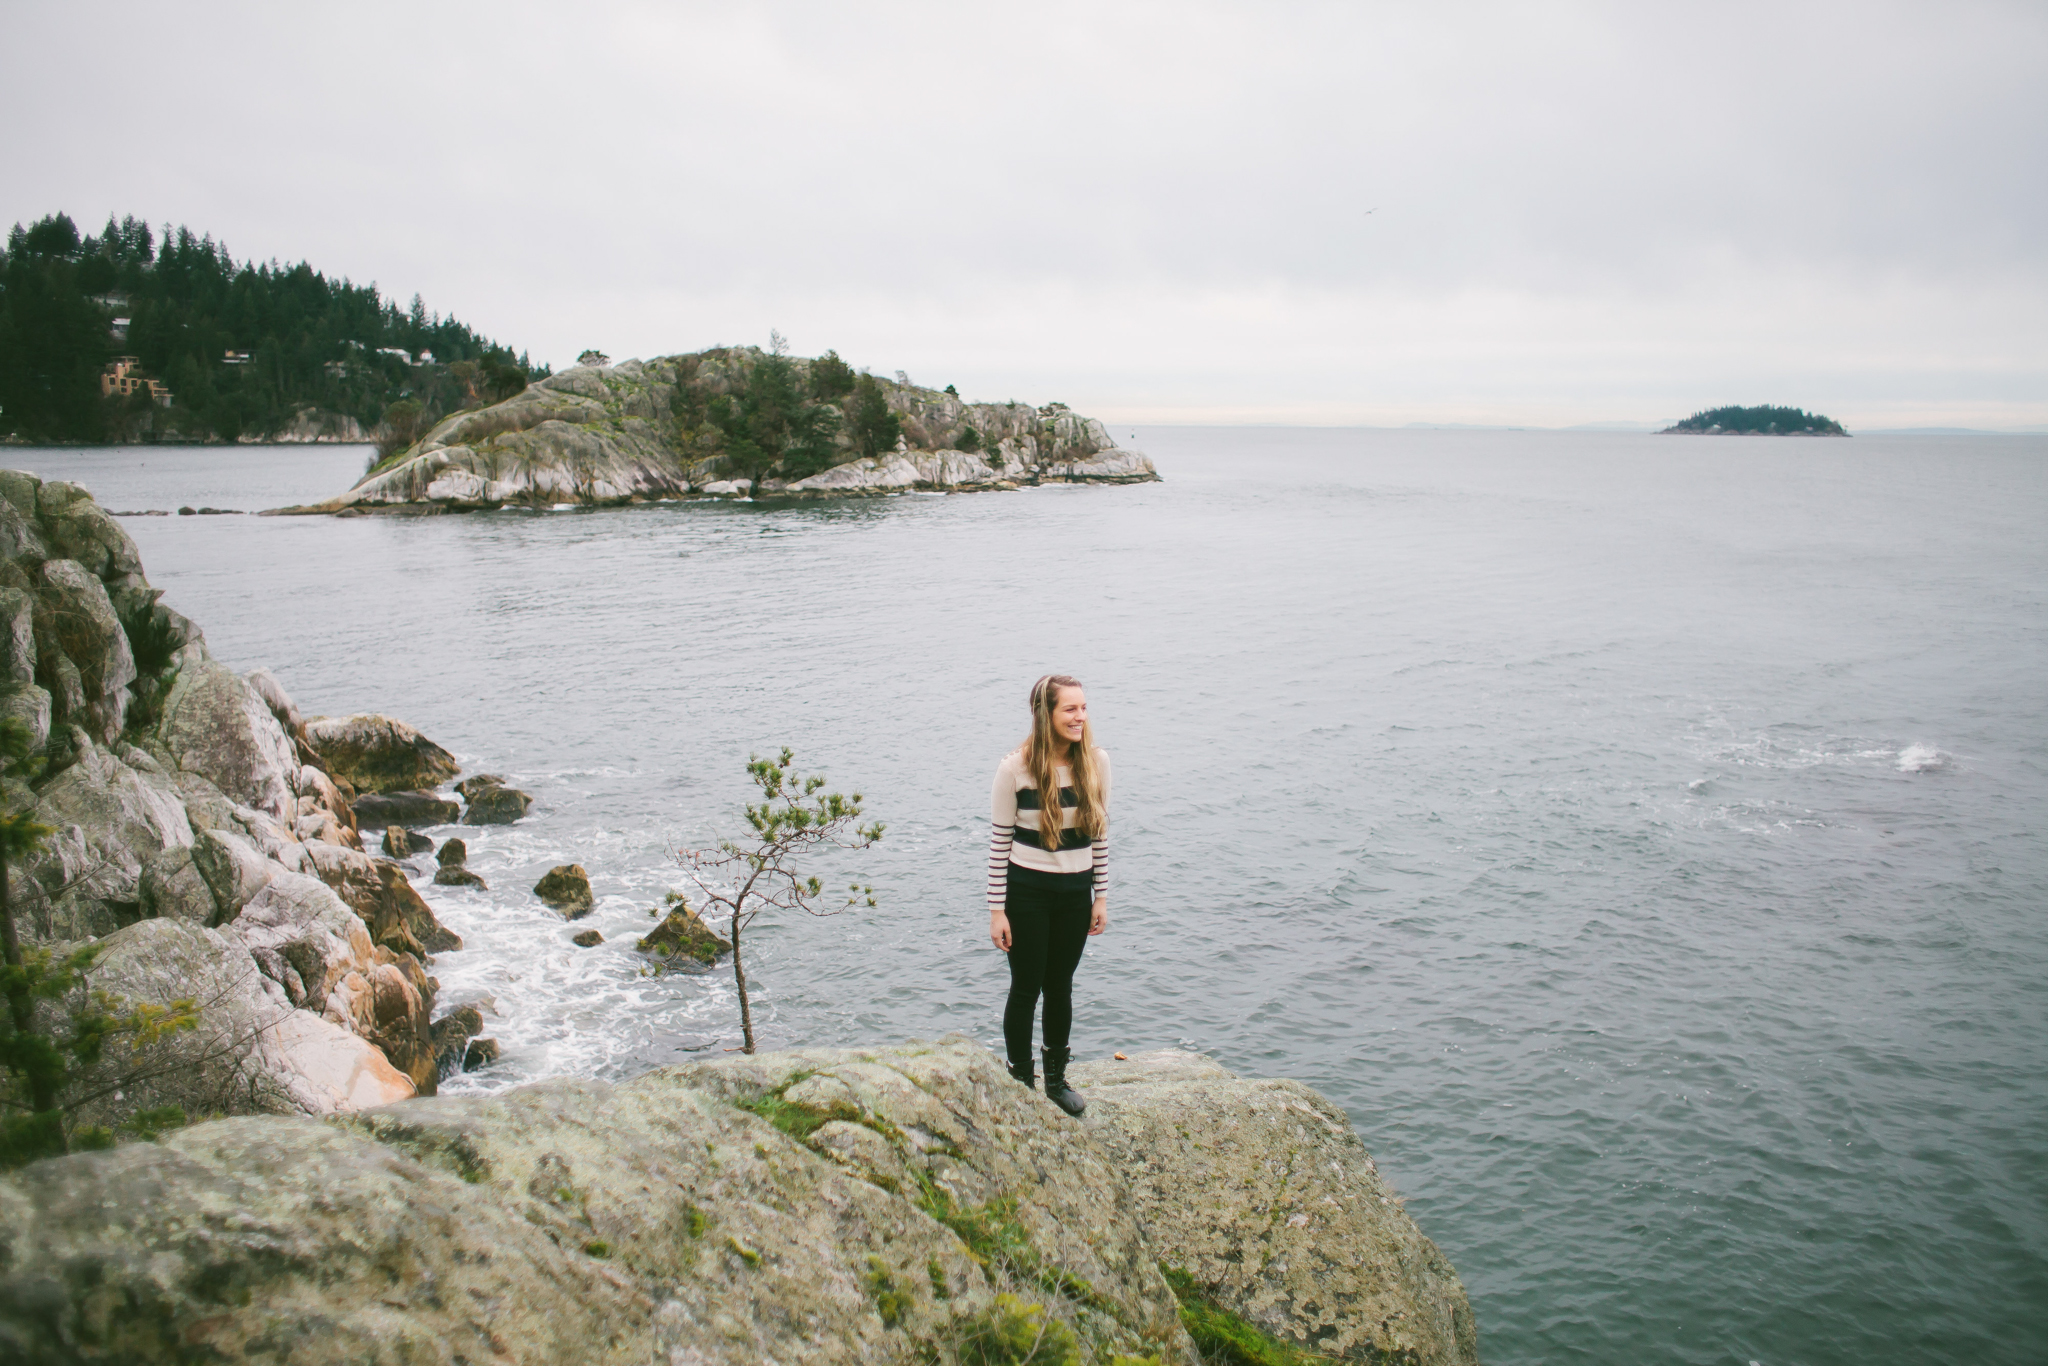 View More: http://michellekarstphotography.pass.us/whytecliffpark